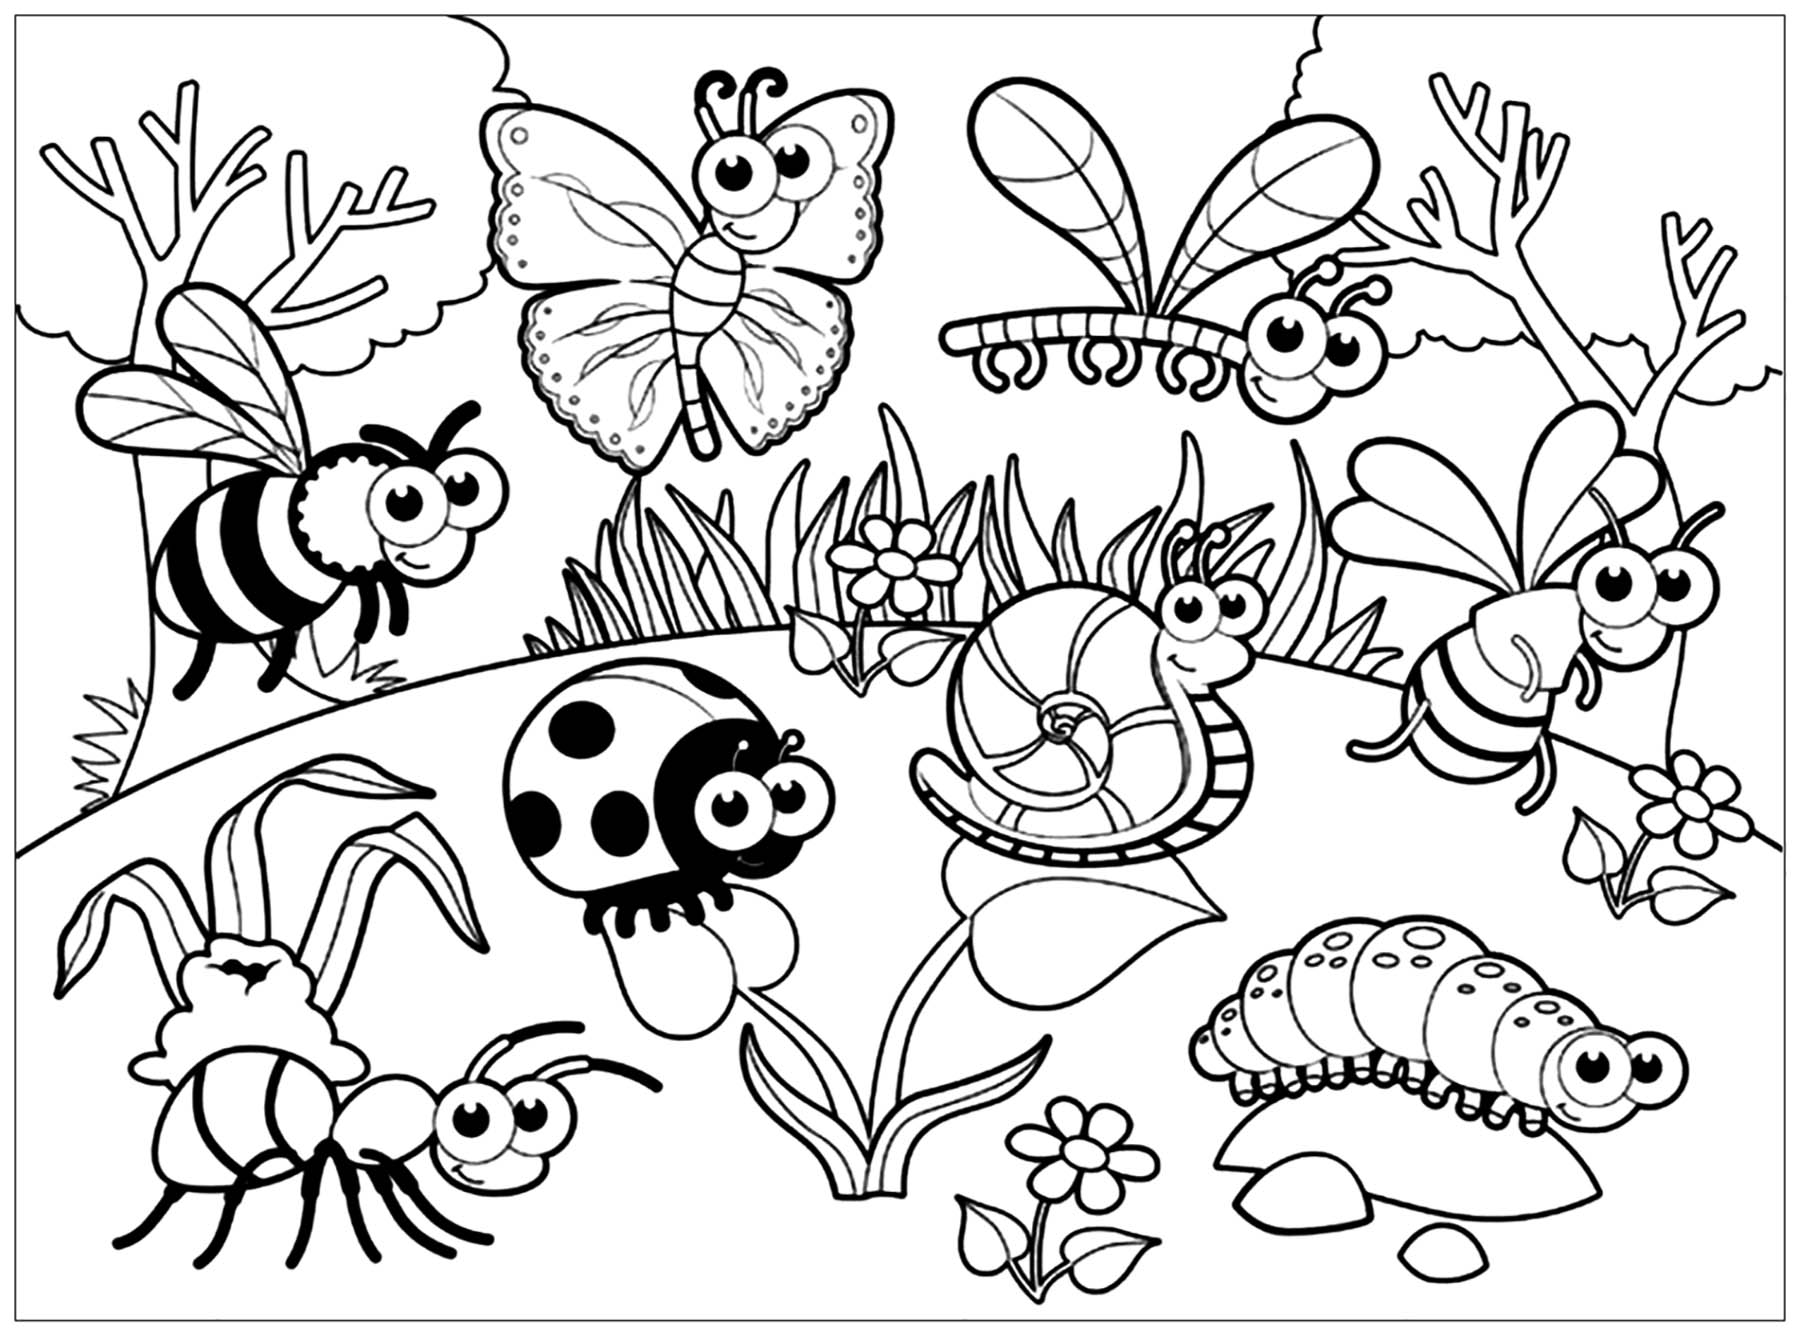 meeting-insects-kids-coloring-pages